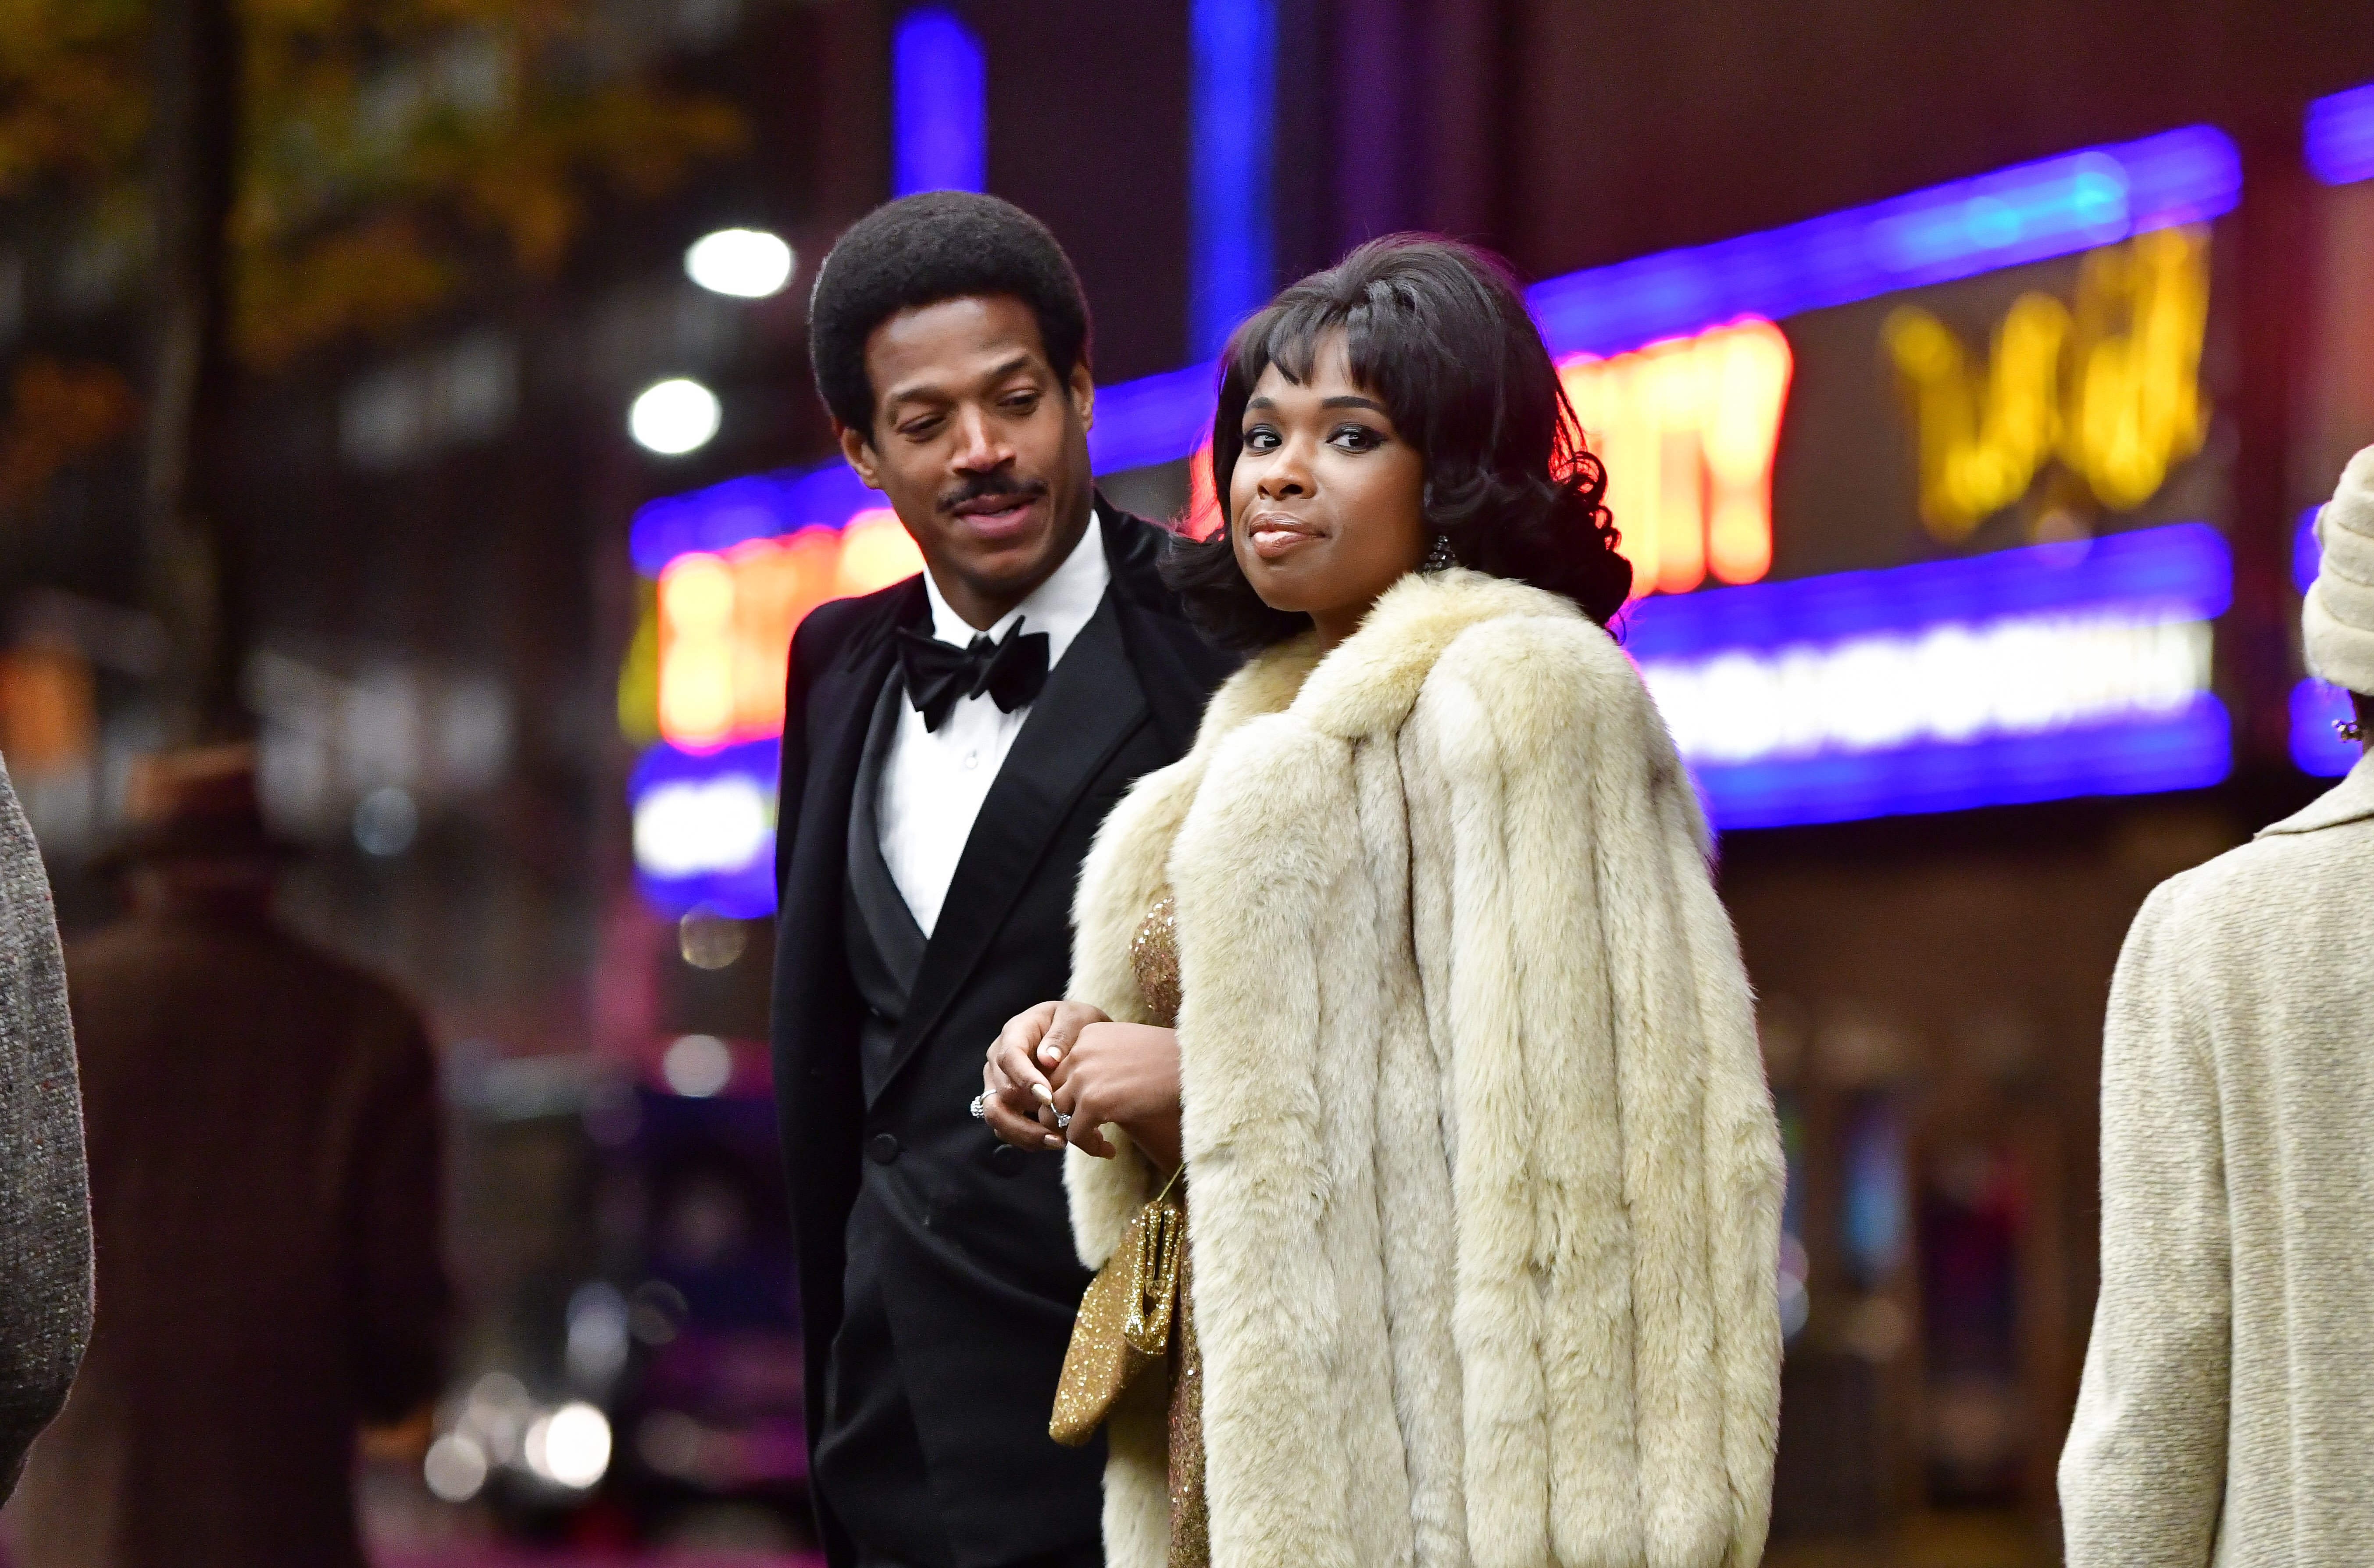 Marlon Wayans and Jennifer Hudson on the set of "Respect" in New York on November 8, 2019 | Source: Getty Images